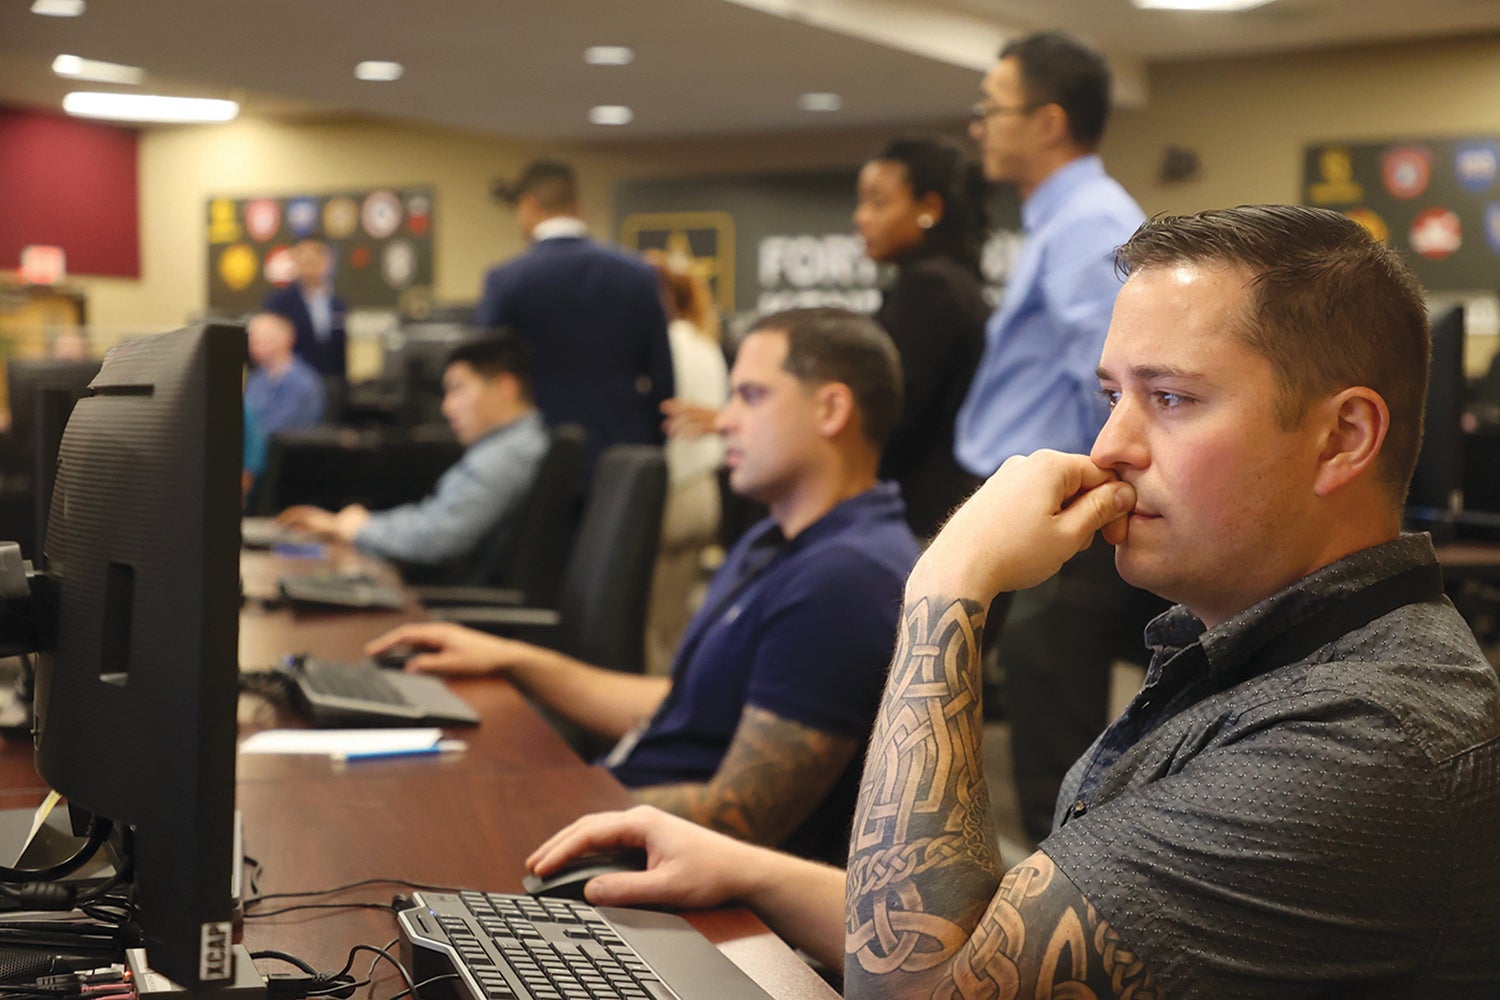 Cadre members test the computers that will be used during the 2023 season of the  Army’s Command Assessment Program at Fort Knox, Kentucky. (Credit: U.S. Army/Eric Pilgrim)